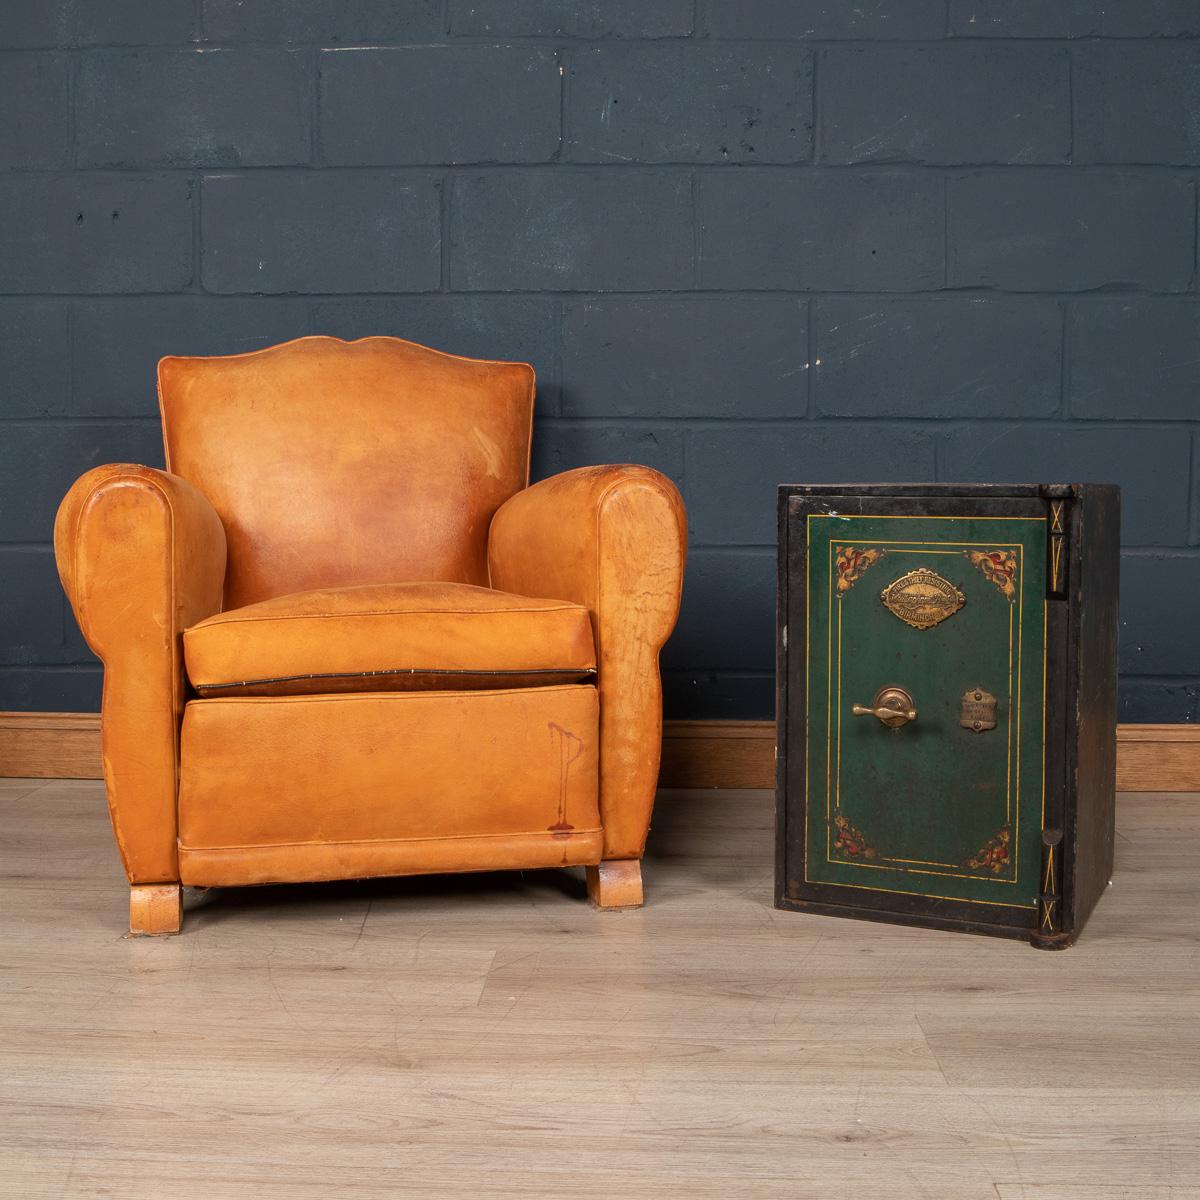 A lovey cast iron fire proof safe in good working order. Complete with its key, it is as fit for purpose today as it was the day it was made. Showing great patina, these safes now make lovely side tables in an industrial style interior or as a